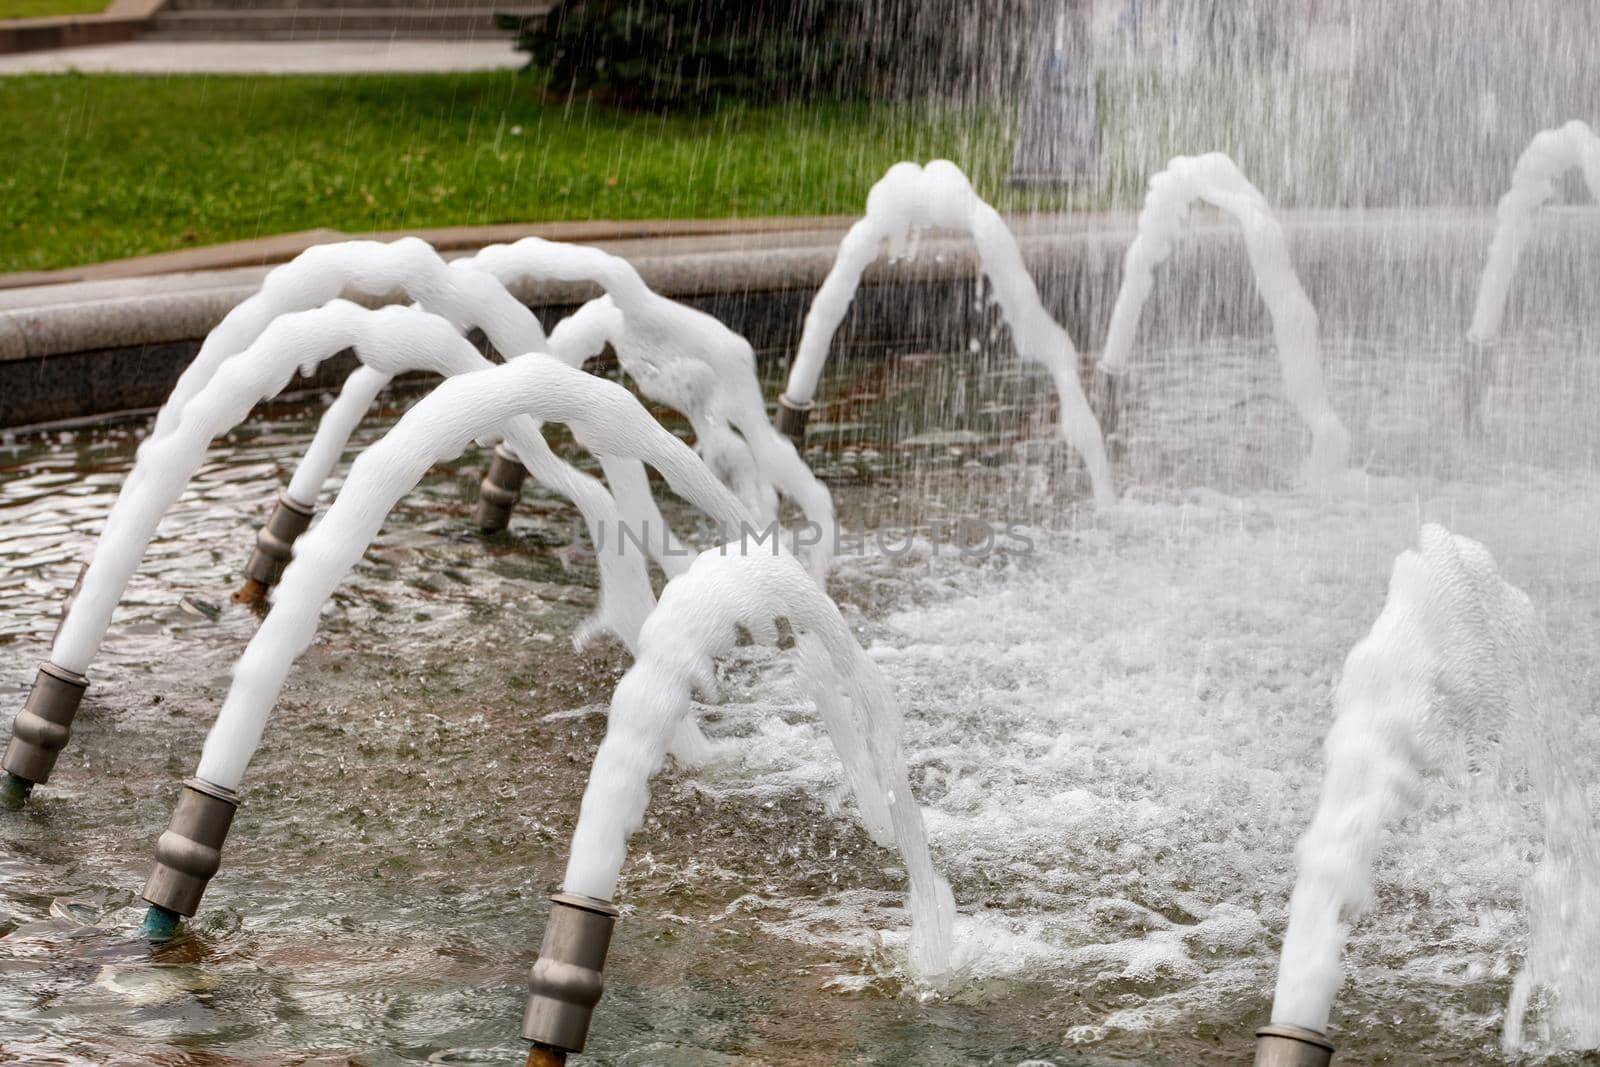 Foamed, dense jets of water burst from metal nozzles in the city fountain. by Sergii